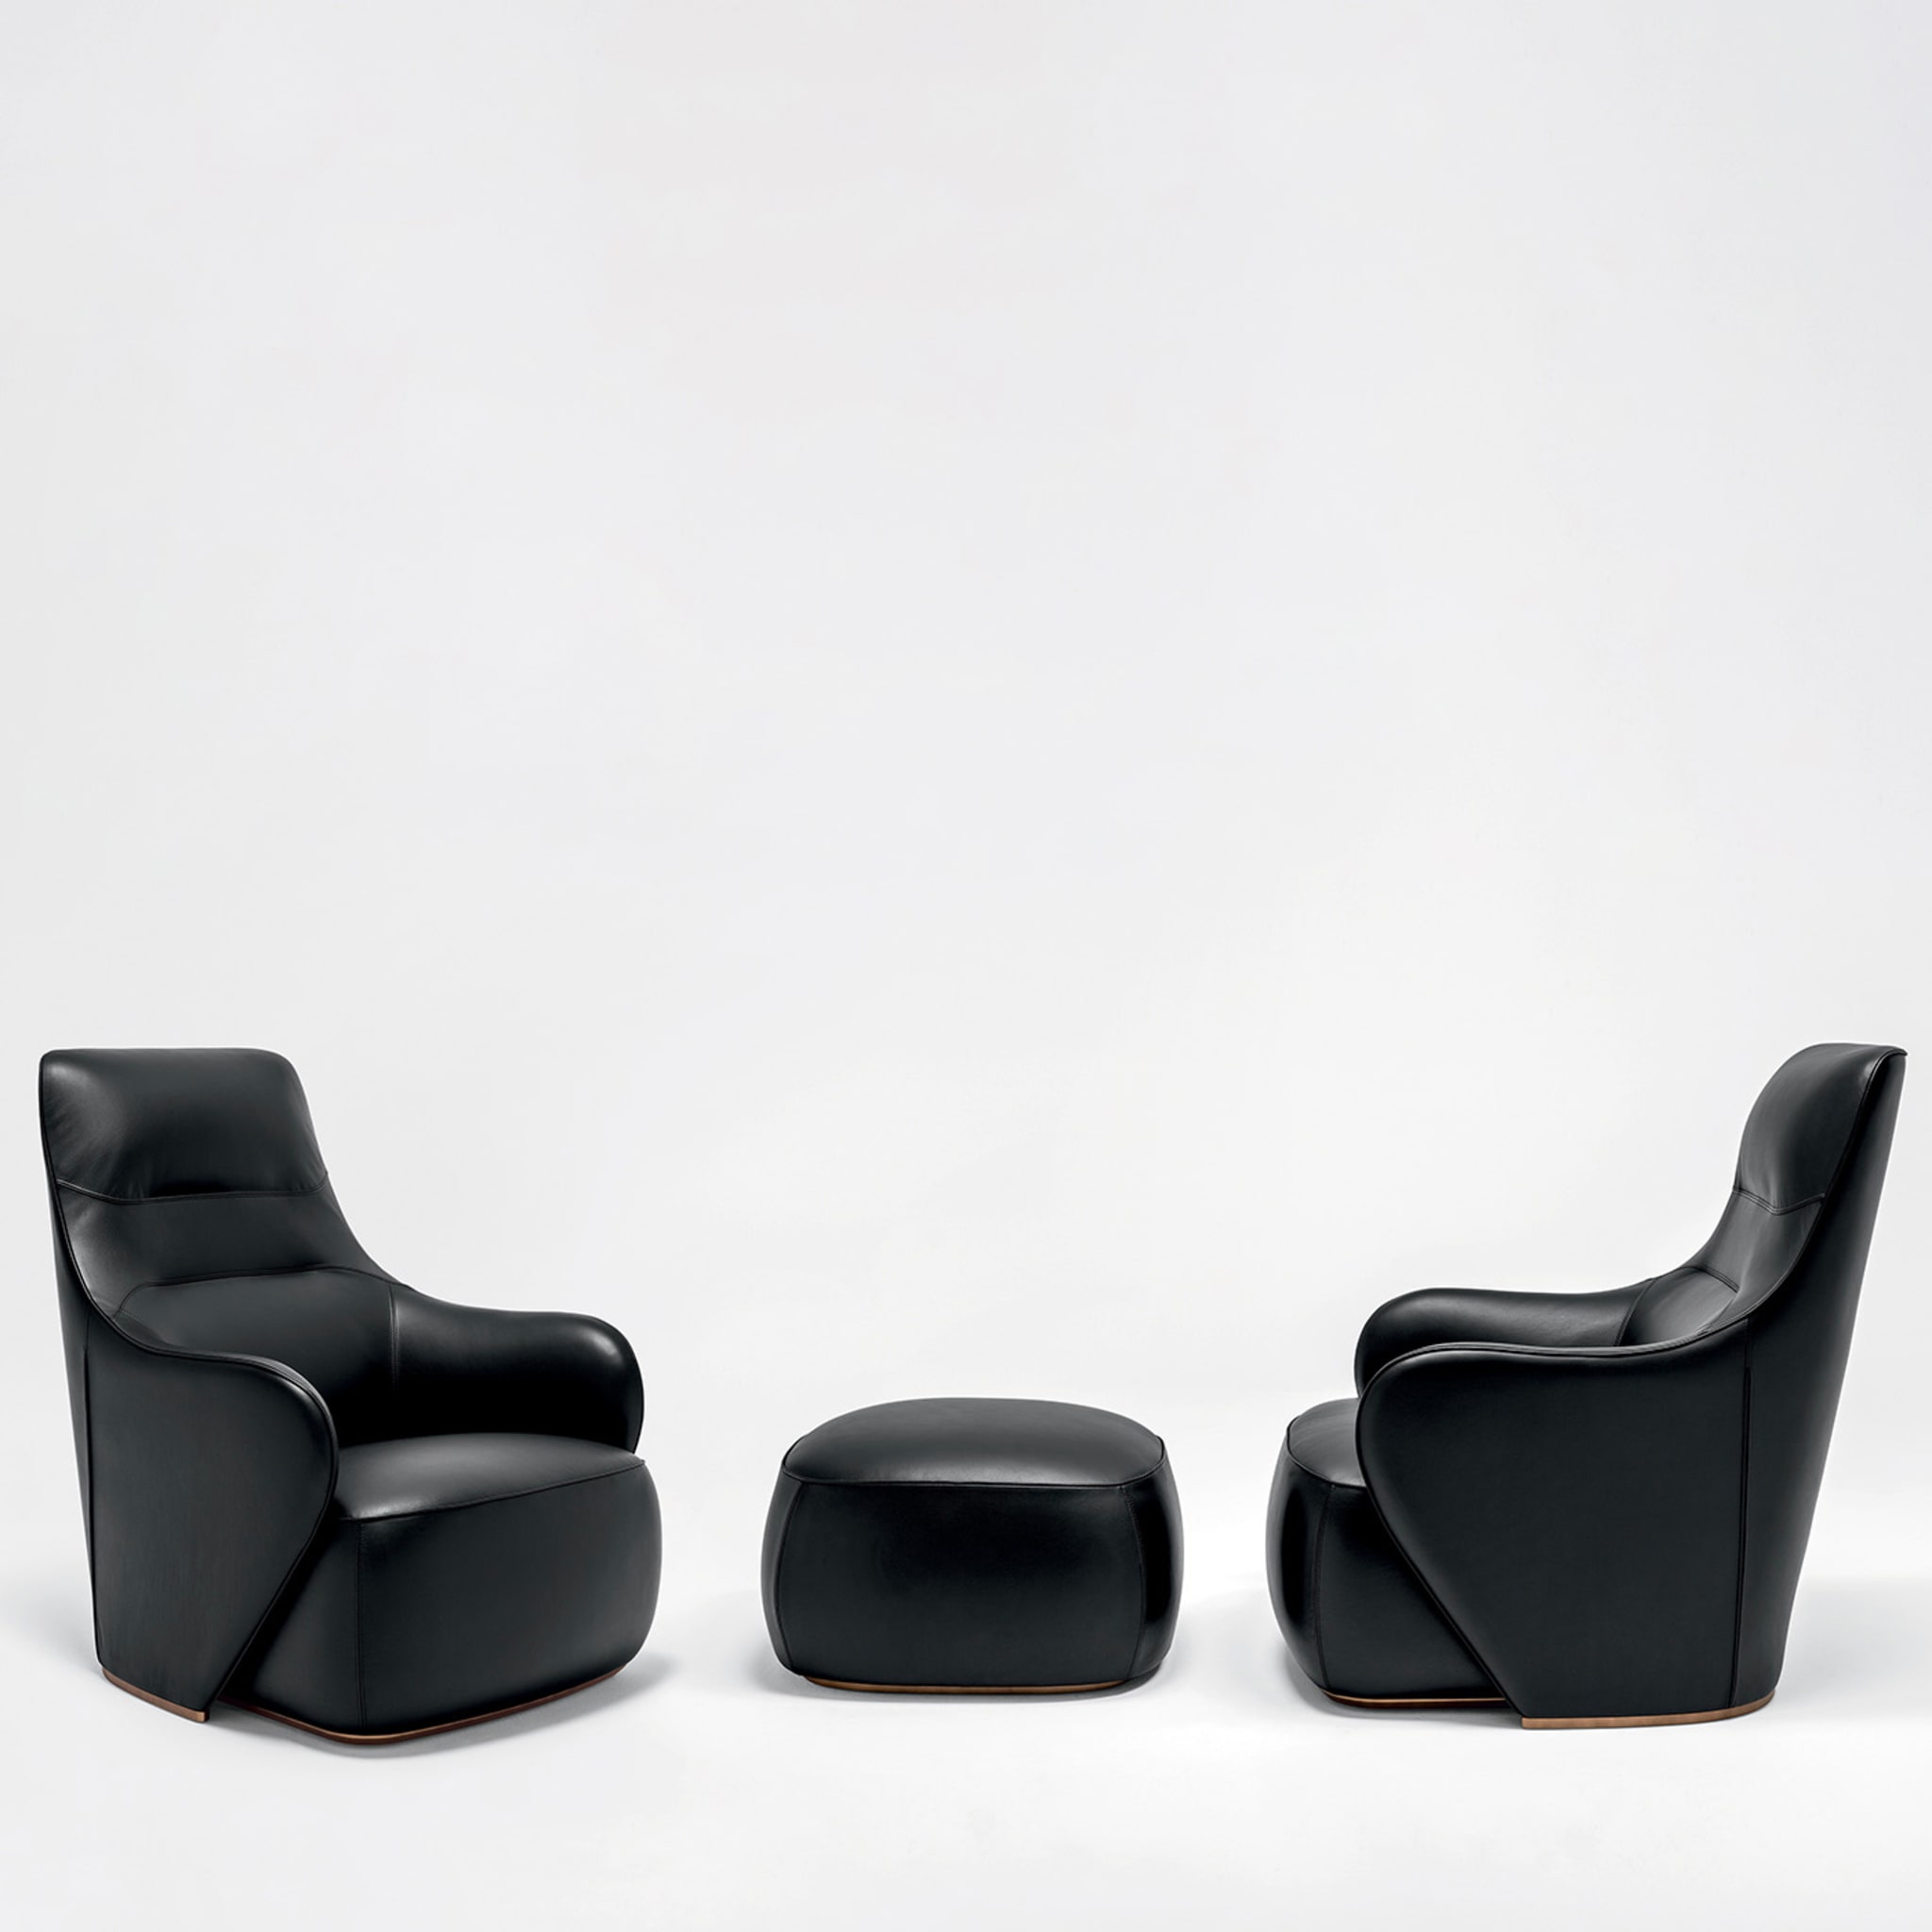 Caddy Black Armchair and Pouf - Alternative view 2